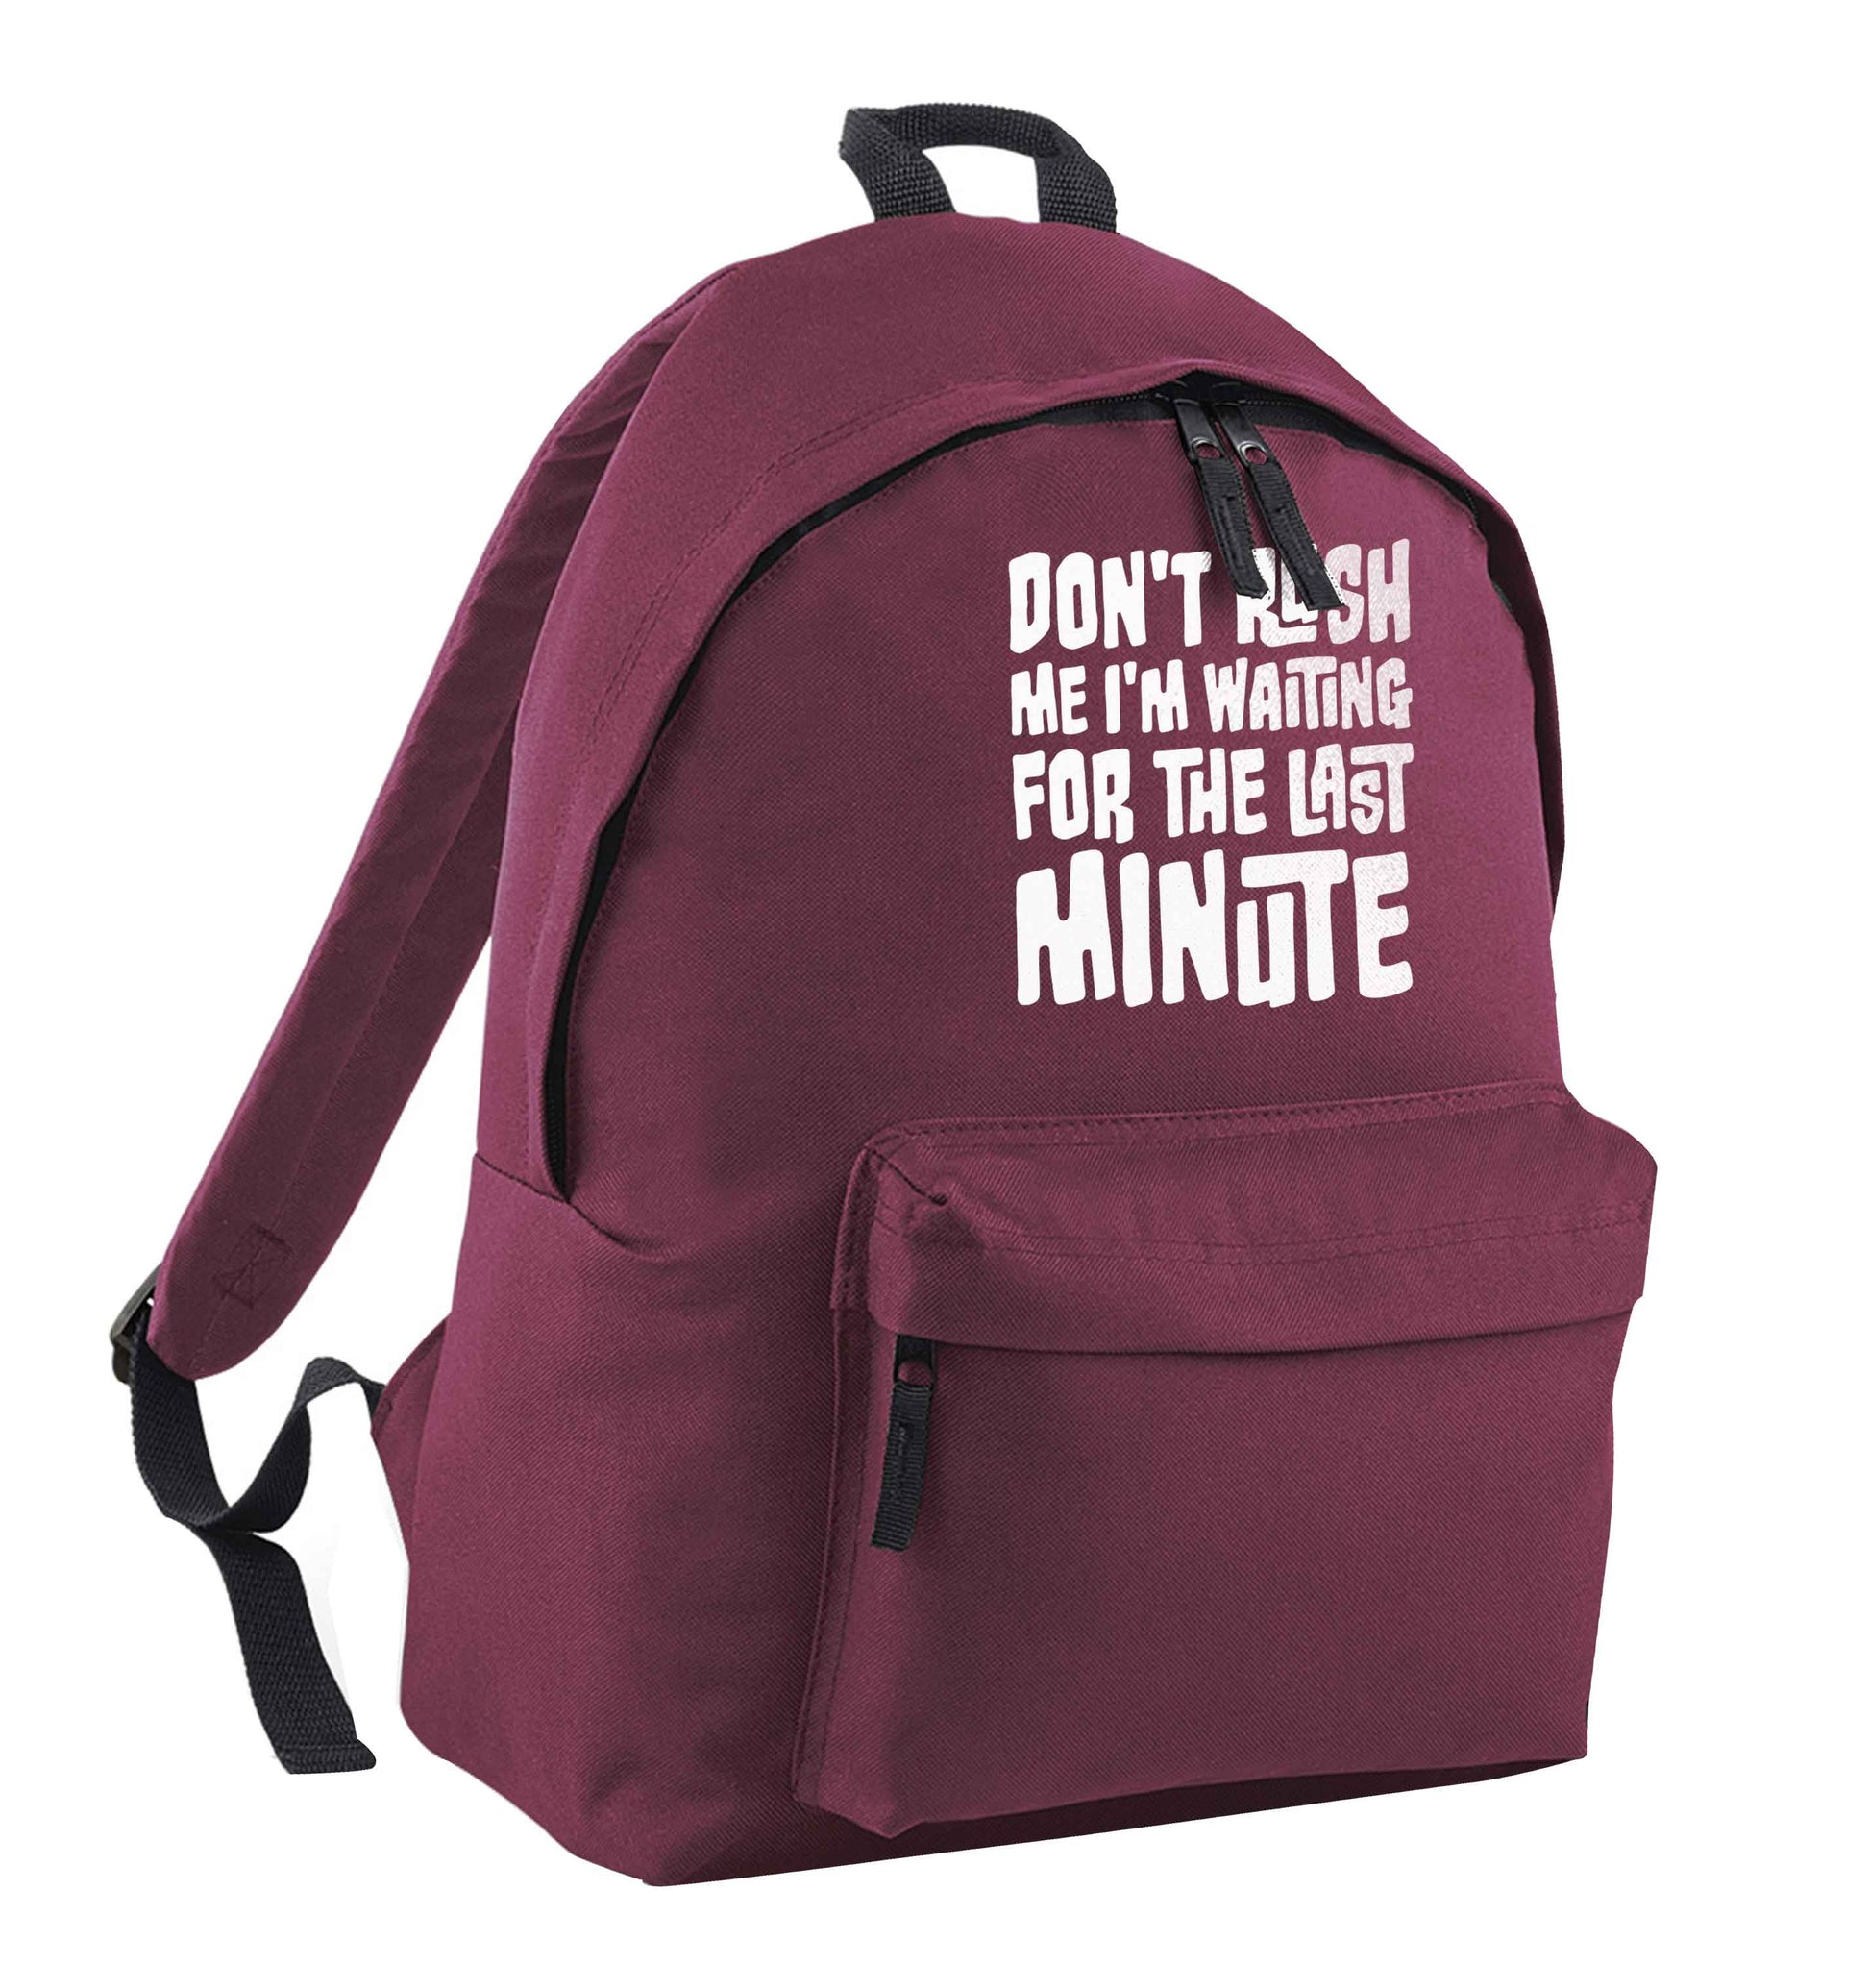 Don't rush me I'm waiting for the last minute maroon adults backpack